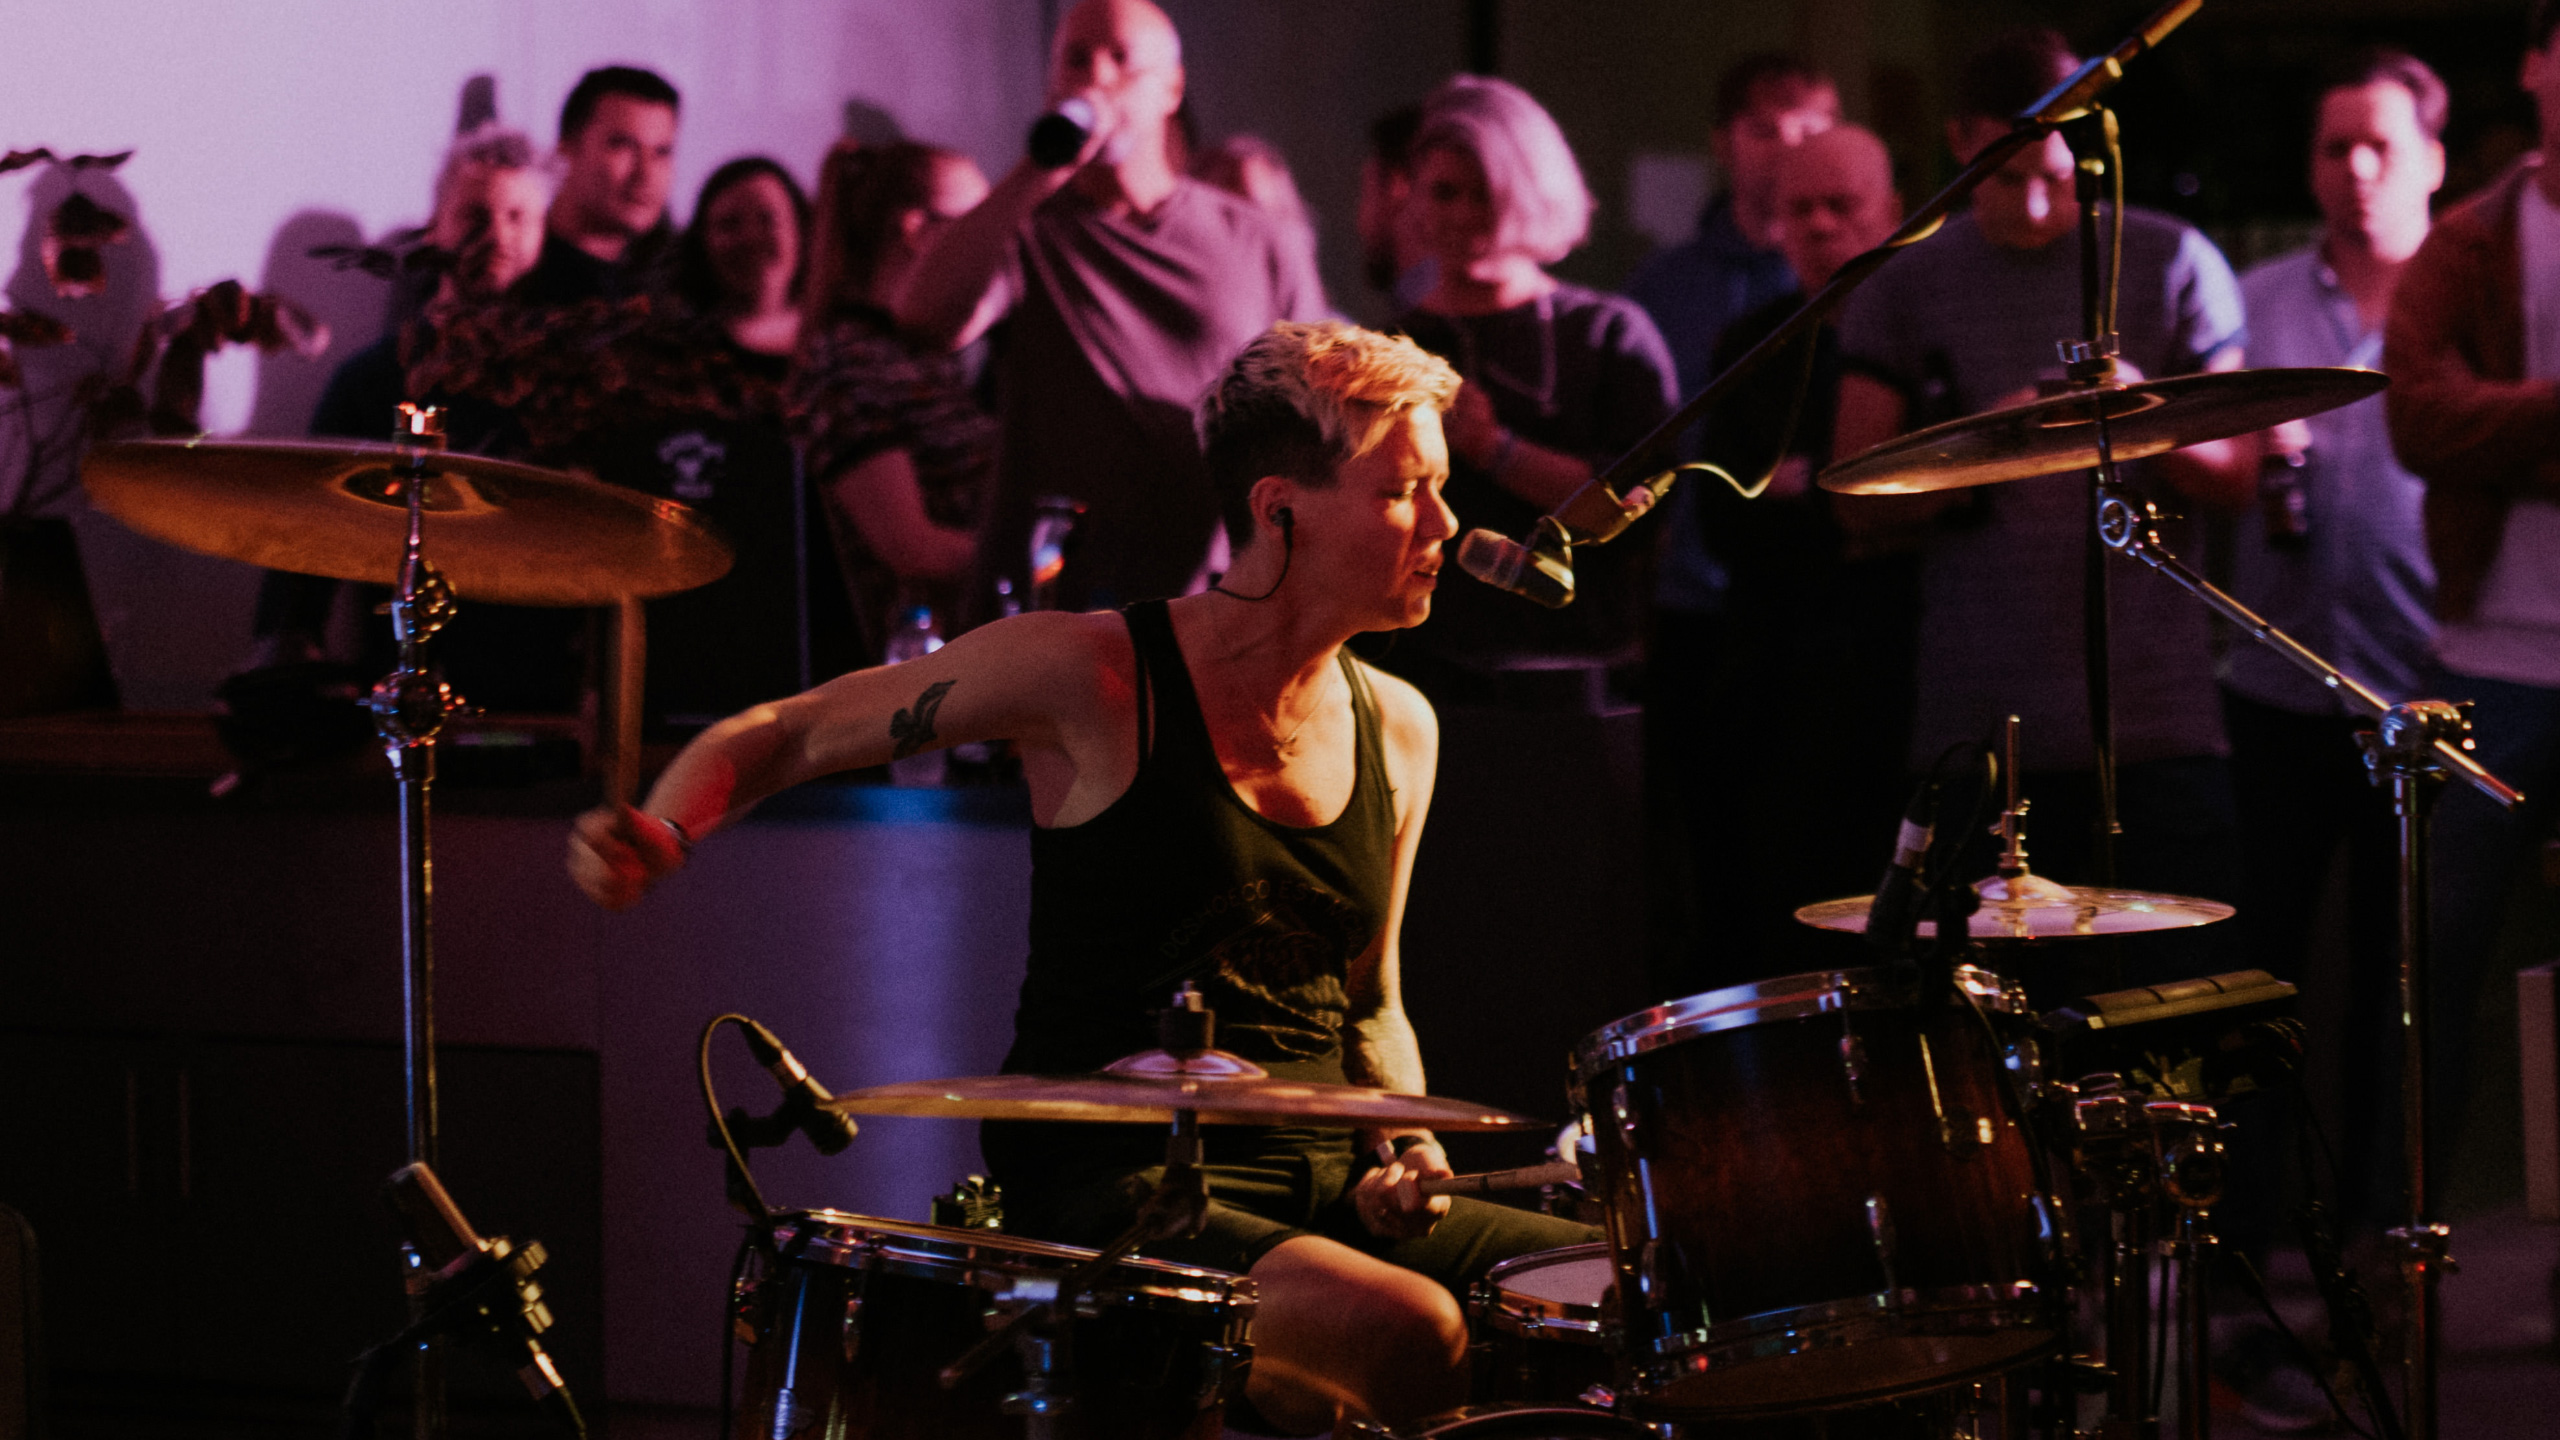 Honeyblood drummer Cat Myers performing at PRS for Music presents